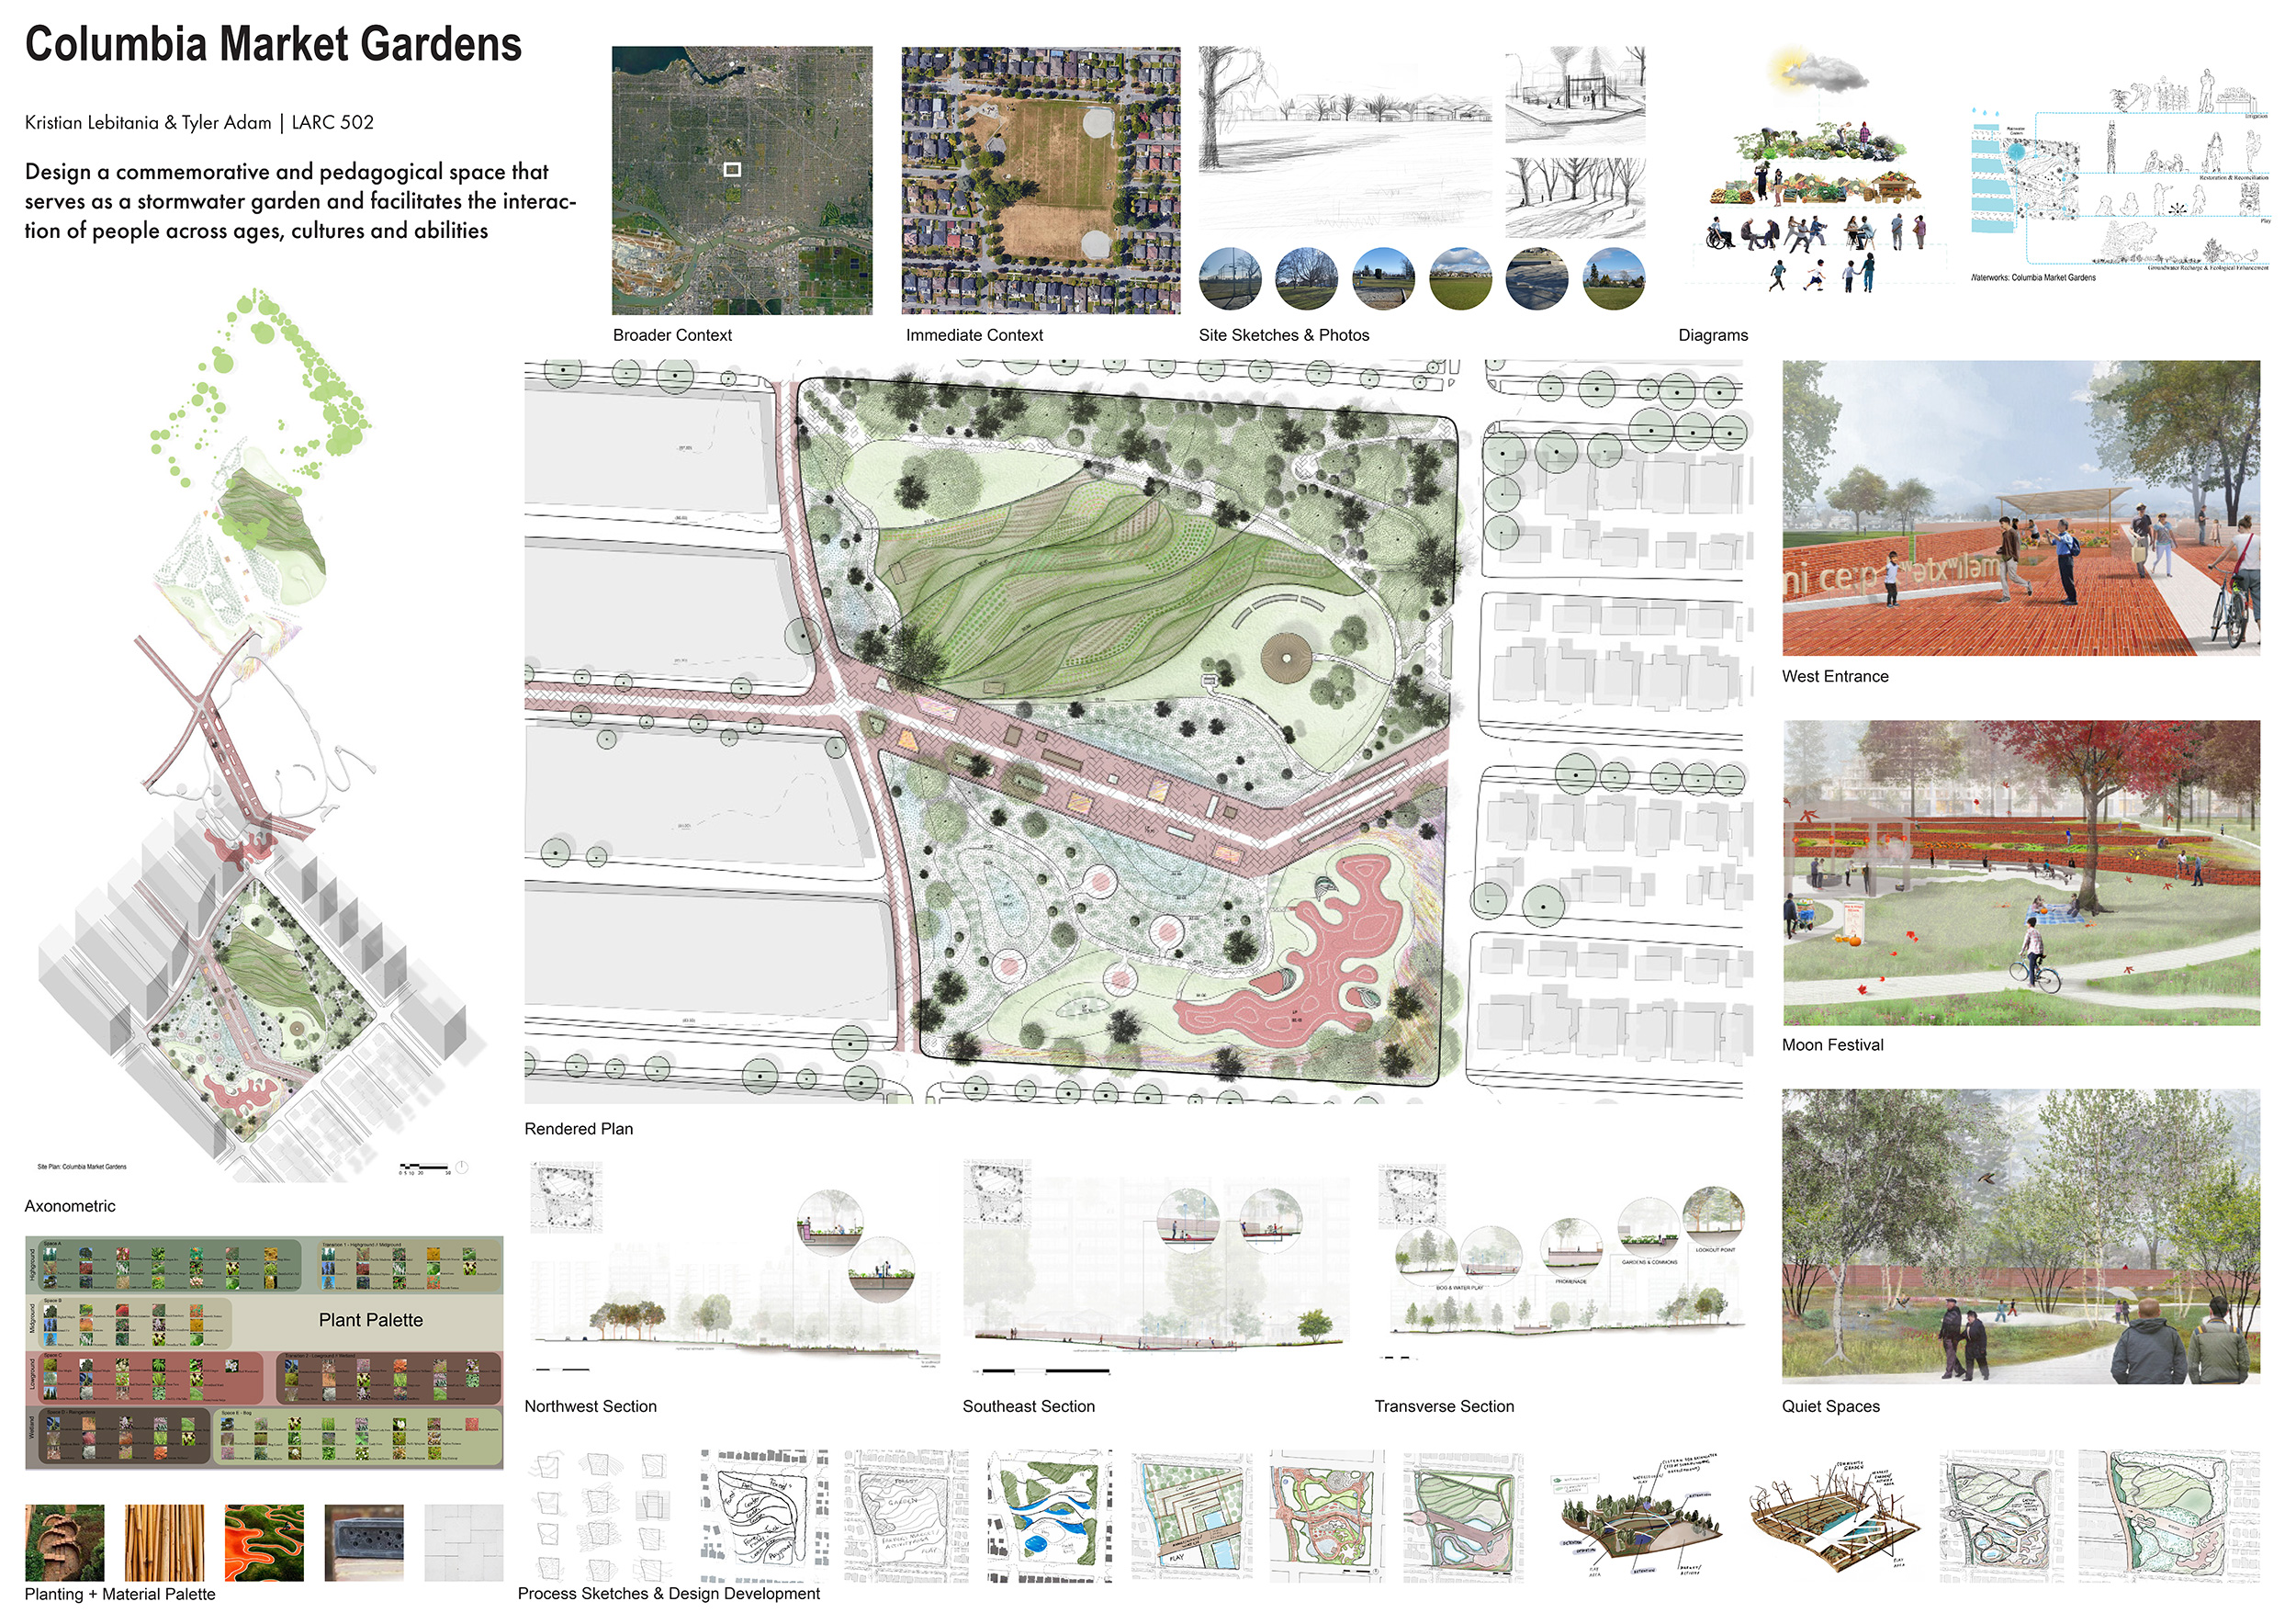 poster with site plan, renderings, diagrams and other images related to the columbia market gardens student project.